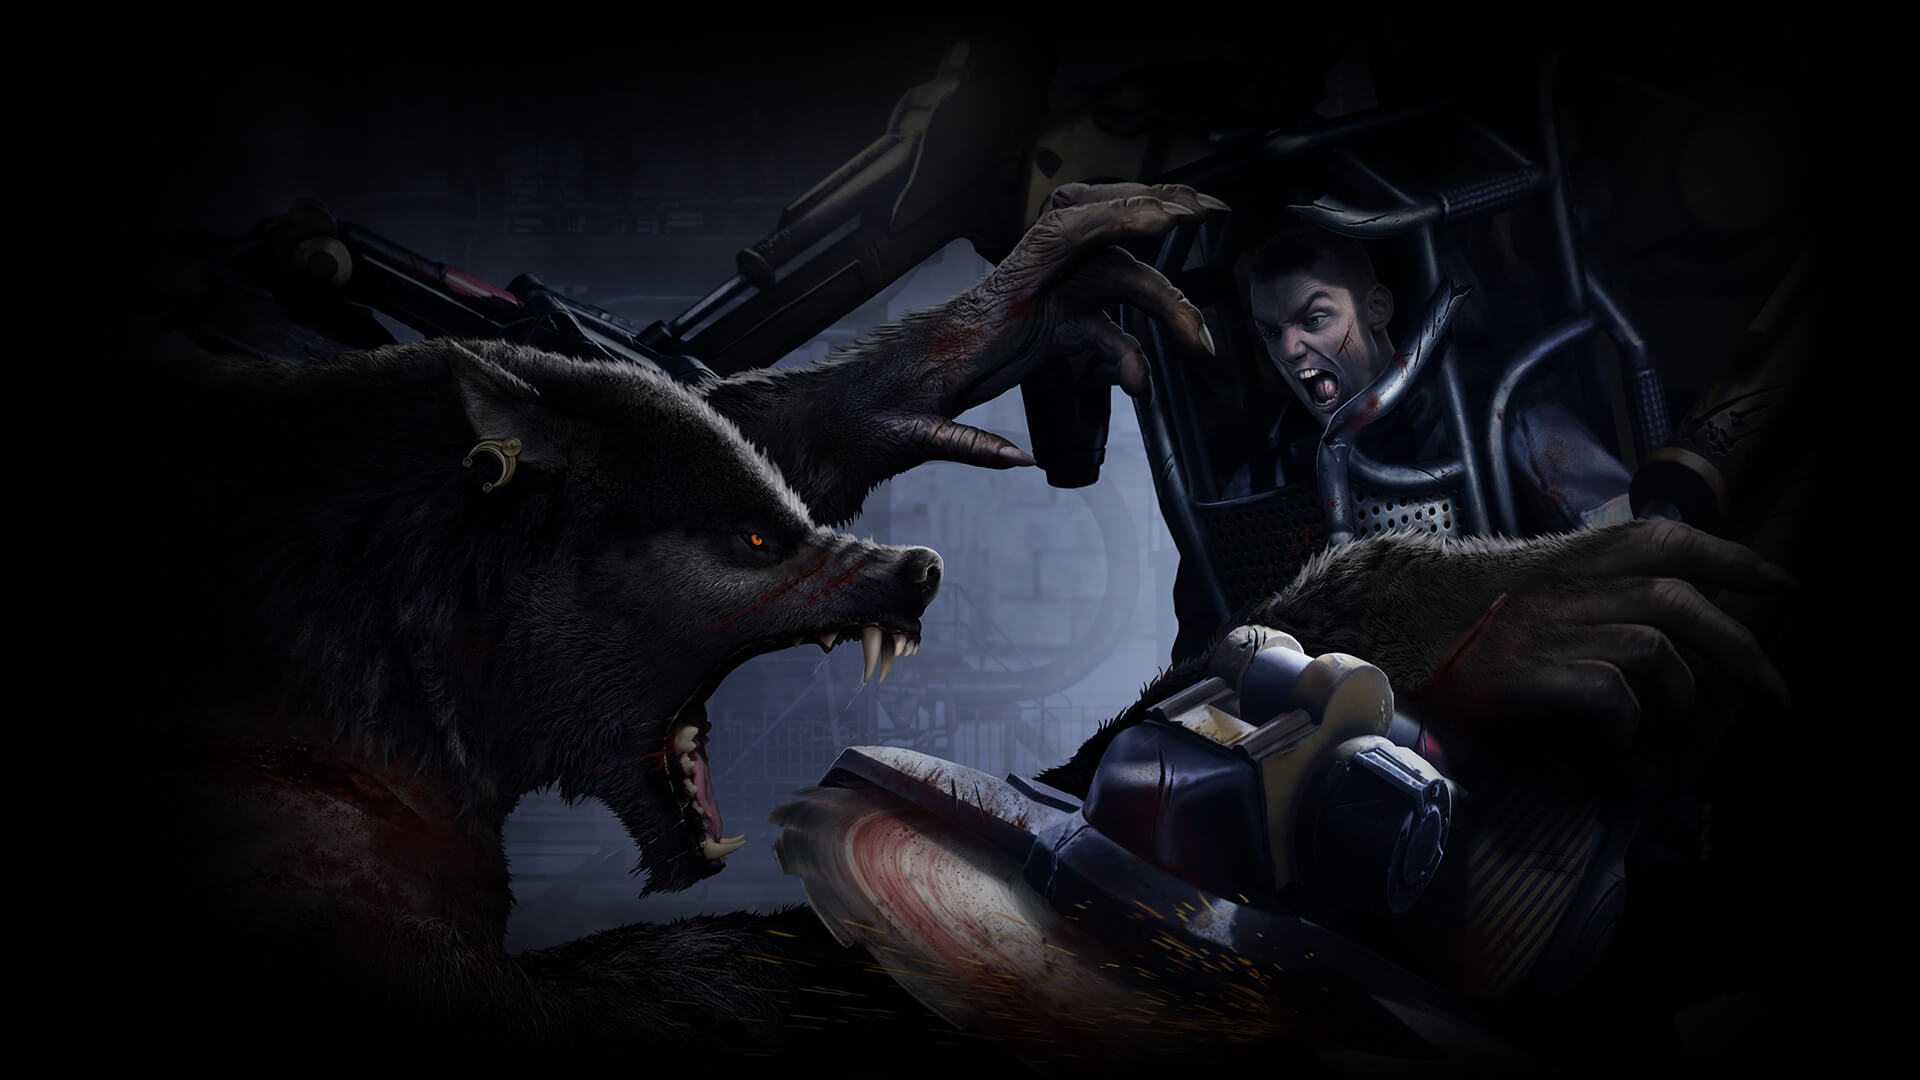 Werewolf: The Apocalypse – Earthblood Pits Wolf Against Machine In New Cinematic Trailer